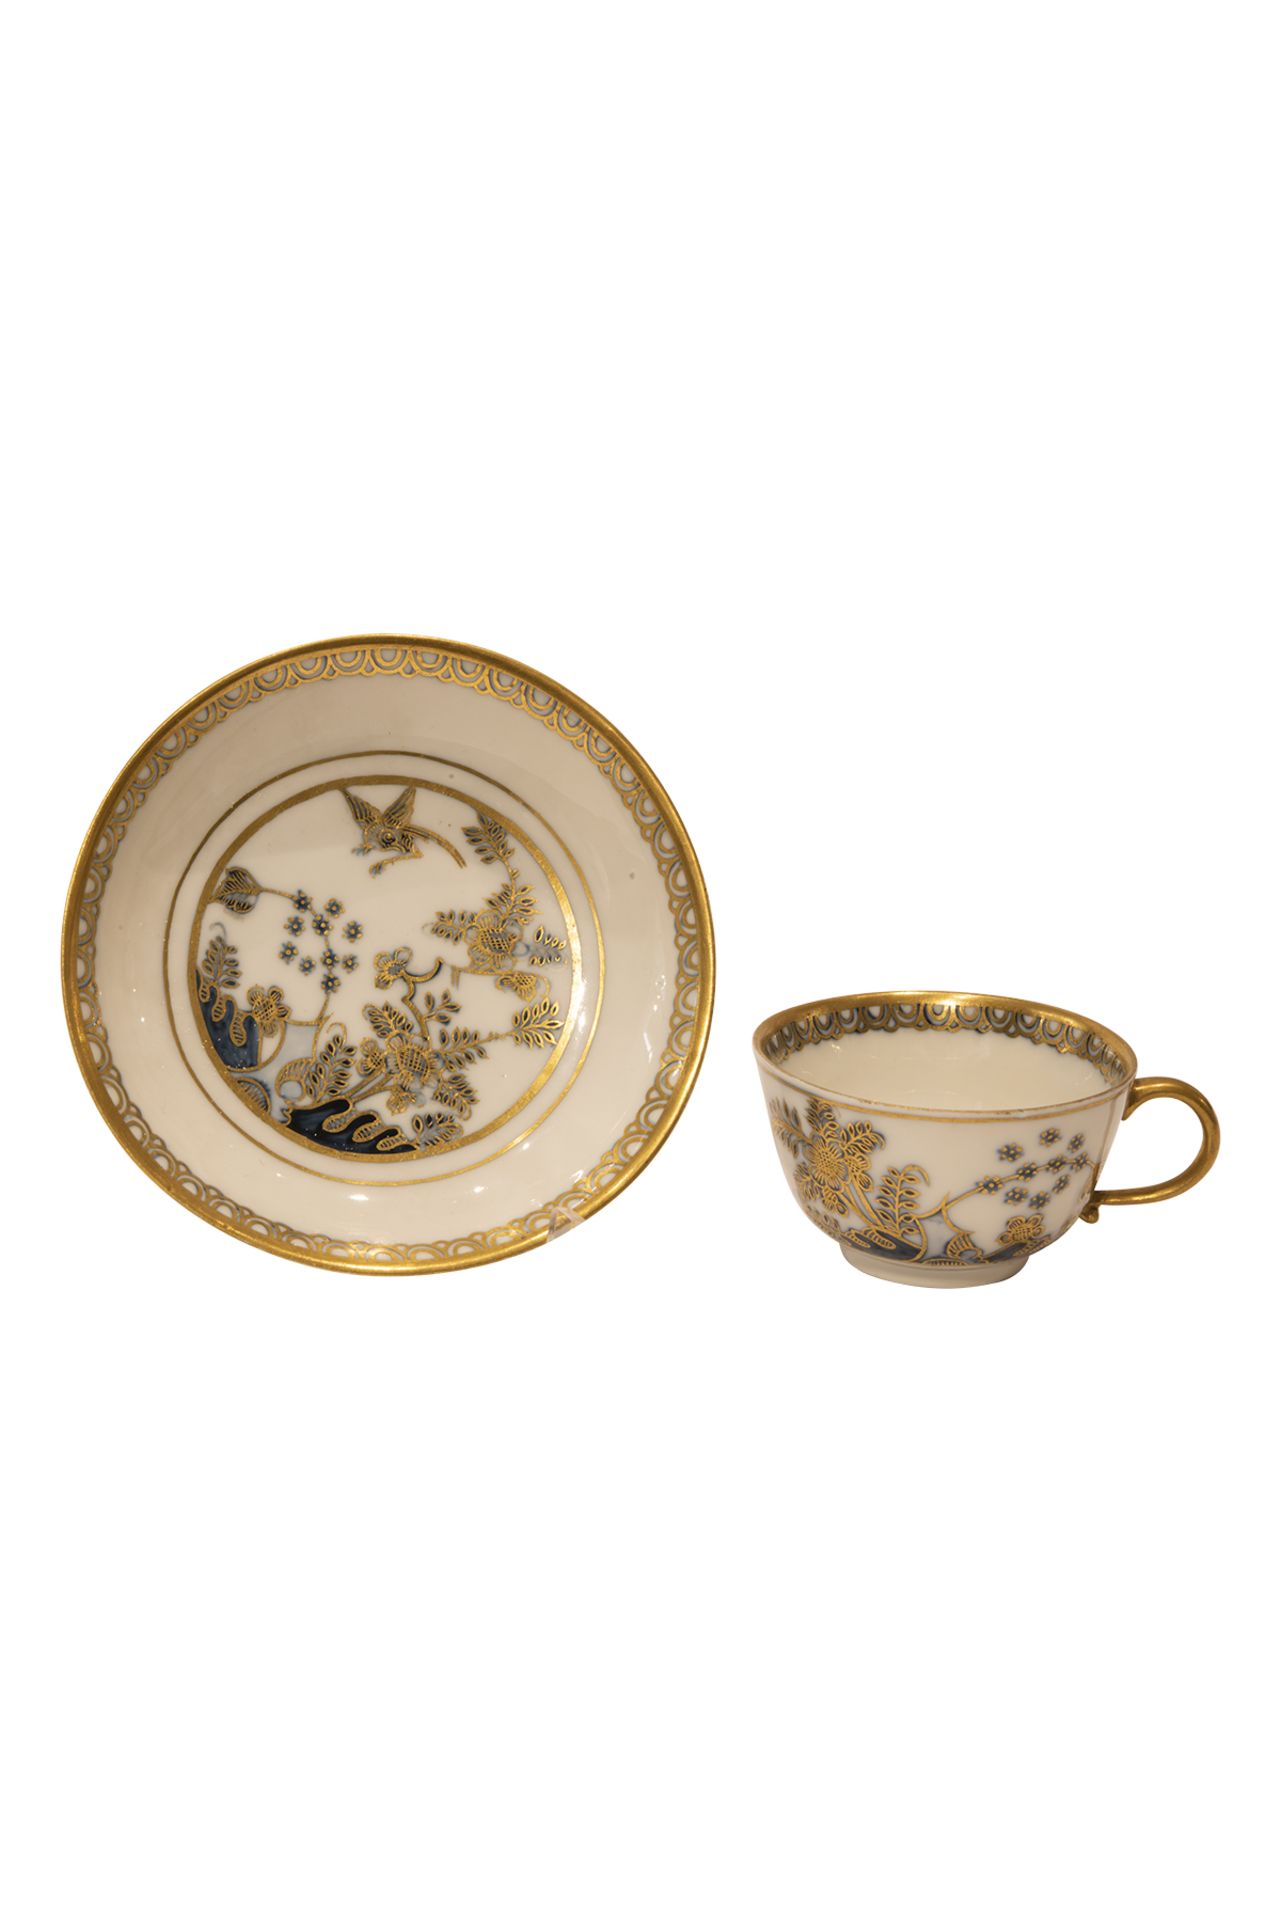 Two Cups with saucers, Meissen around 1740 - Image 5 of 6